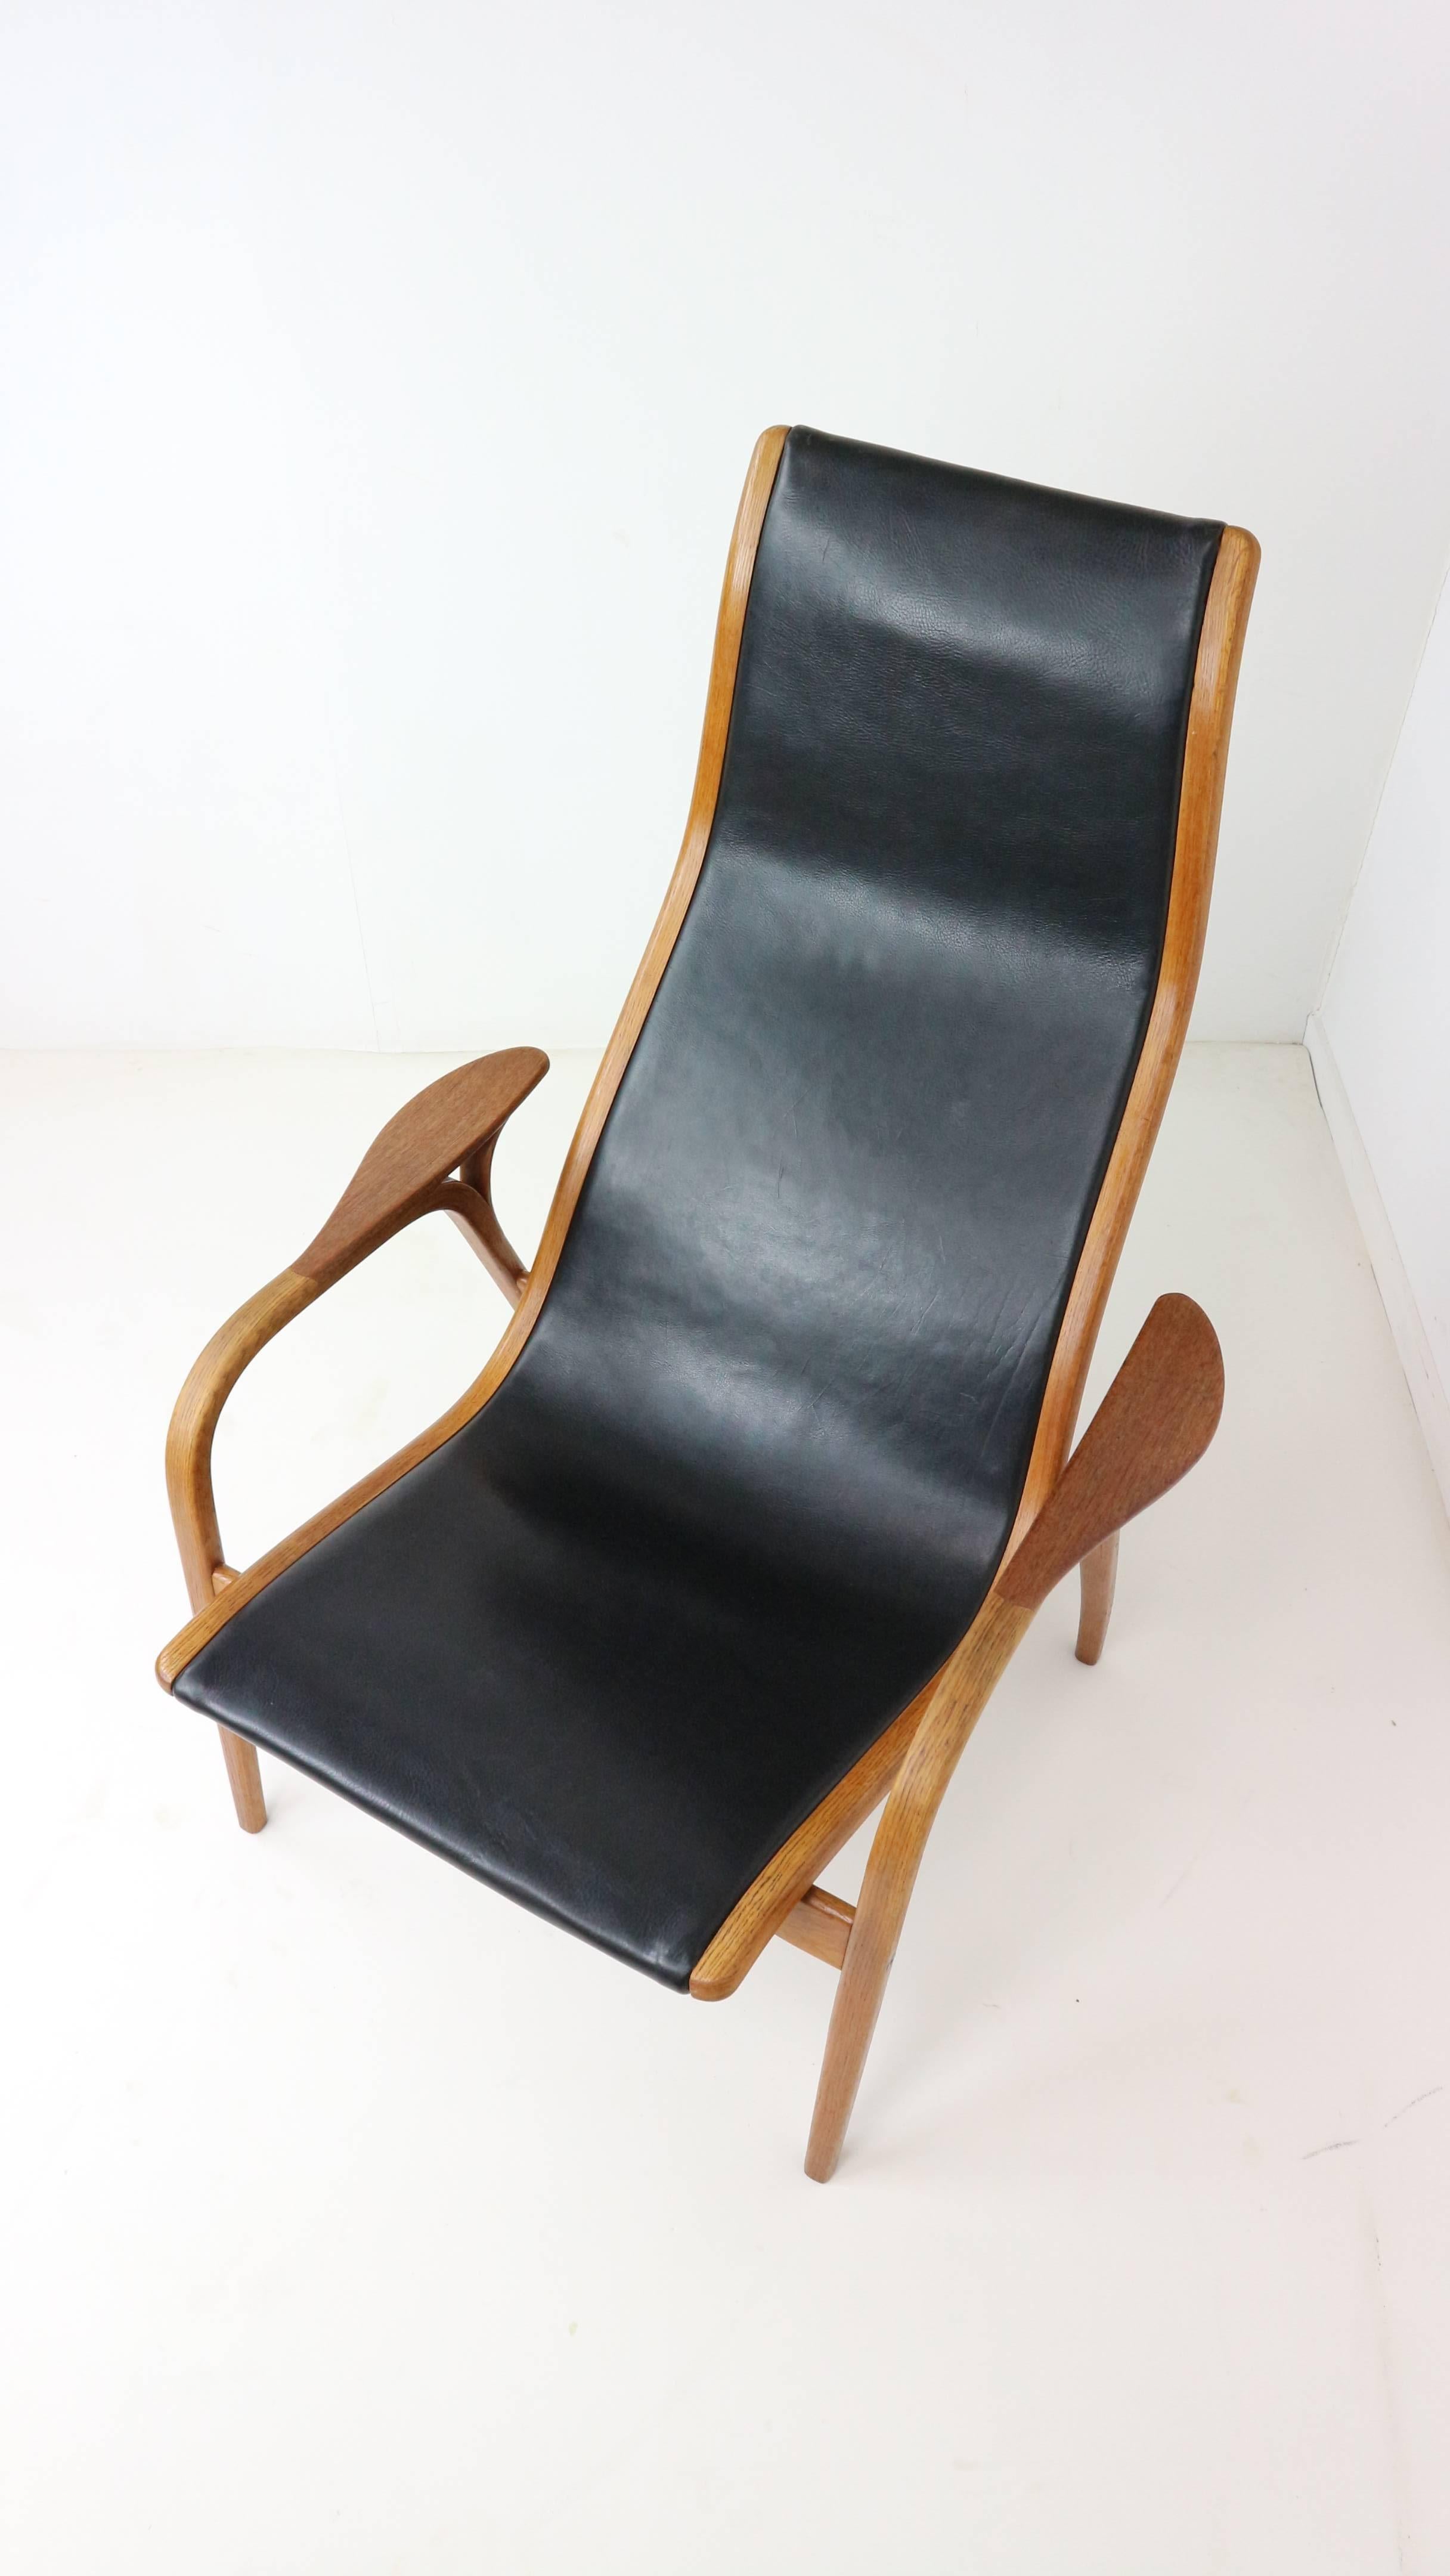 This vintage Lamino chair was made in Sweden by Swedese and designed in 1956 by Swedese founder Yngve Ekstrom. The bentwood chair frame is teak wood with the original black leather, which has minimal wear. The maker's mark is on the back of the